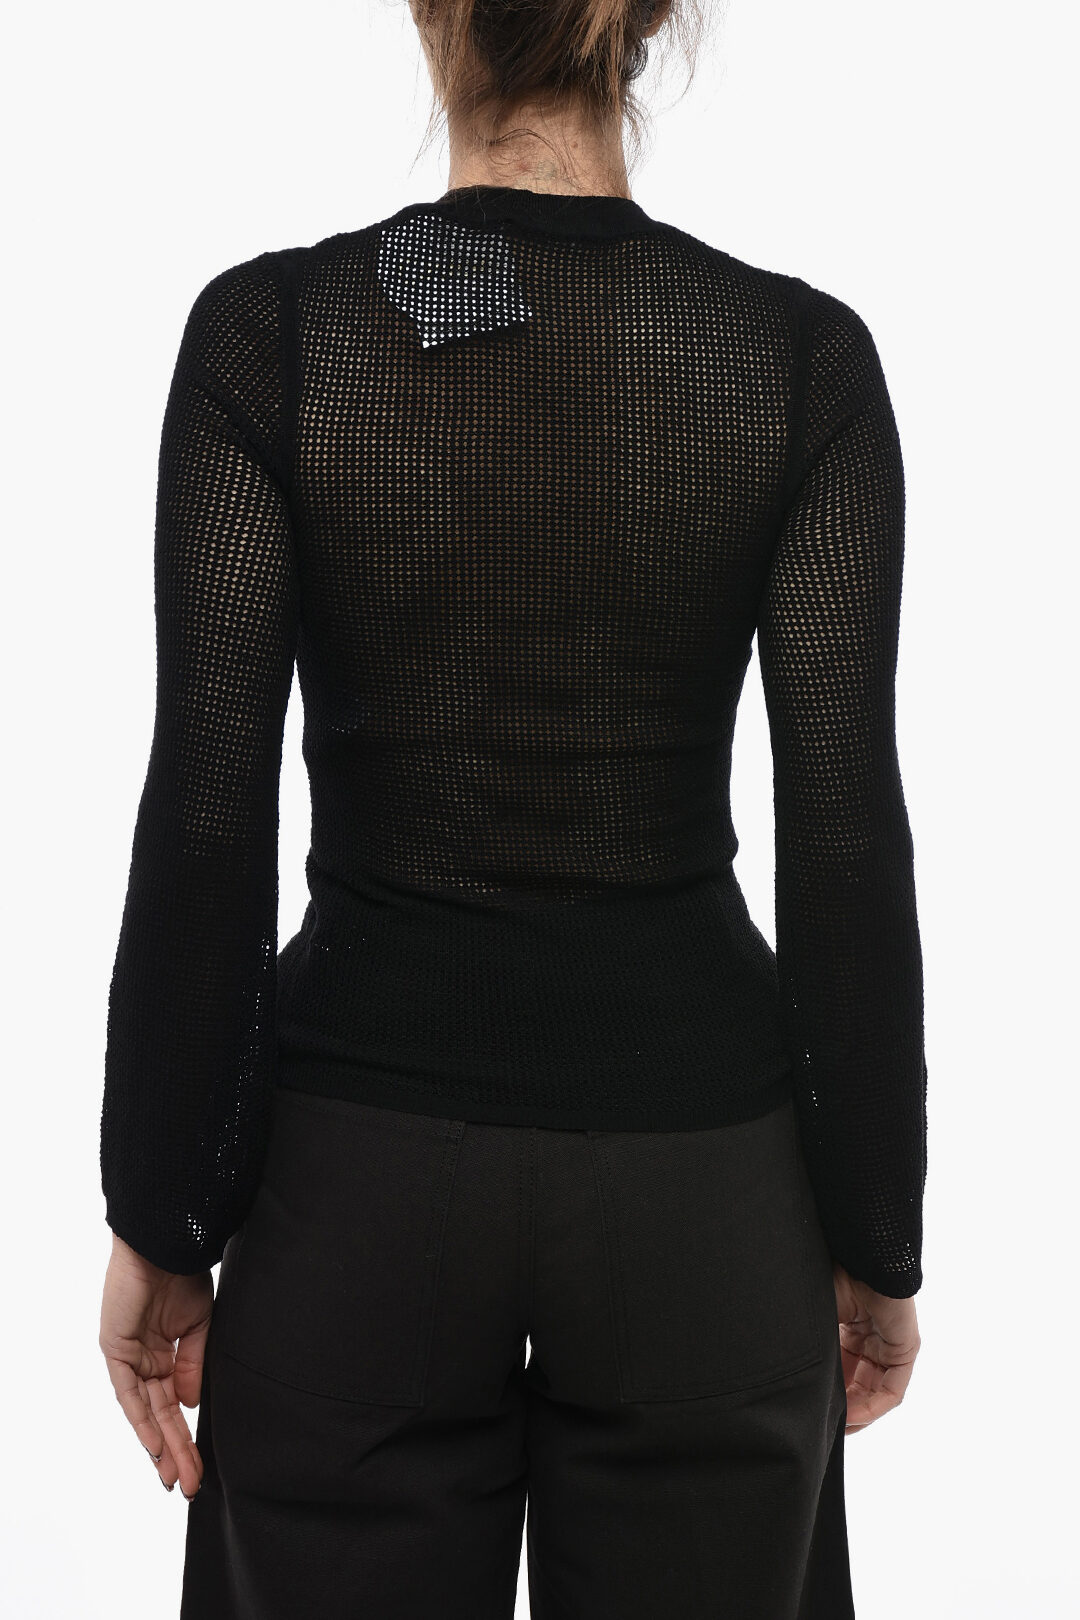 Chloe Cashmere Blend Perforated Sweater with Buttons women - Glamood Outlet